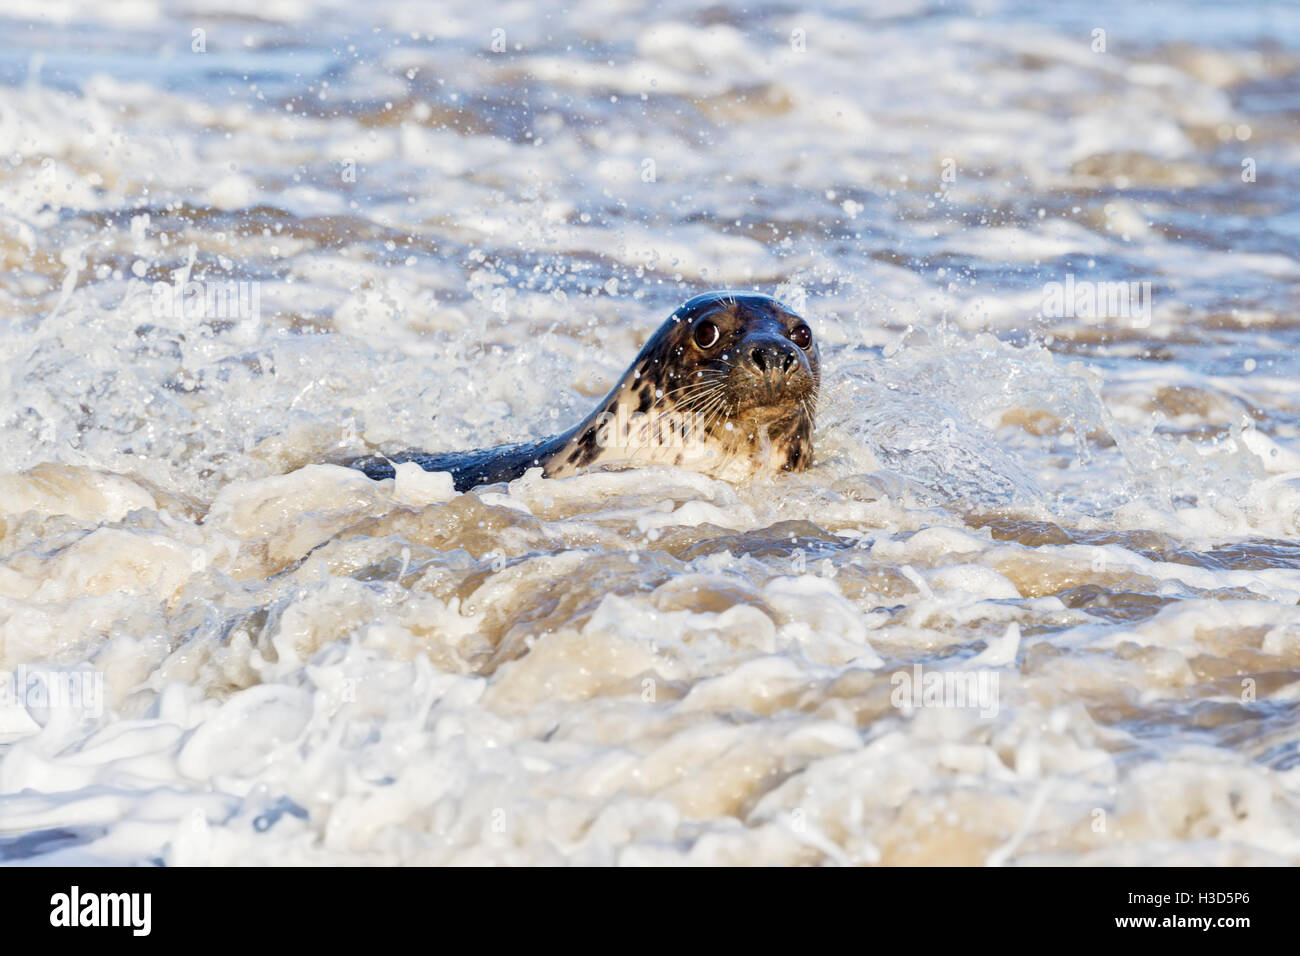 An adult female Grey seal swims amidst the surf, North Sea coast, Norfolk, England Stock Photo